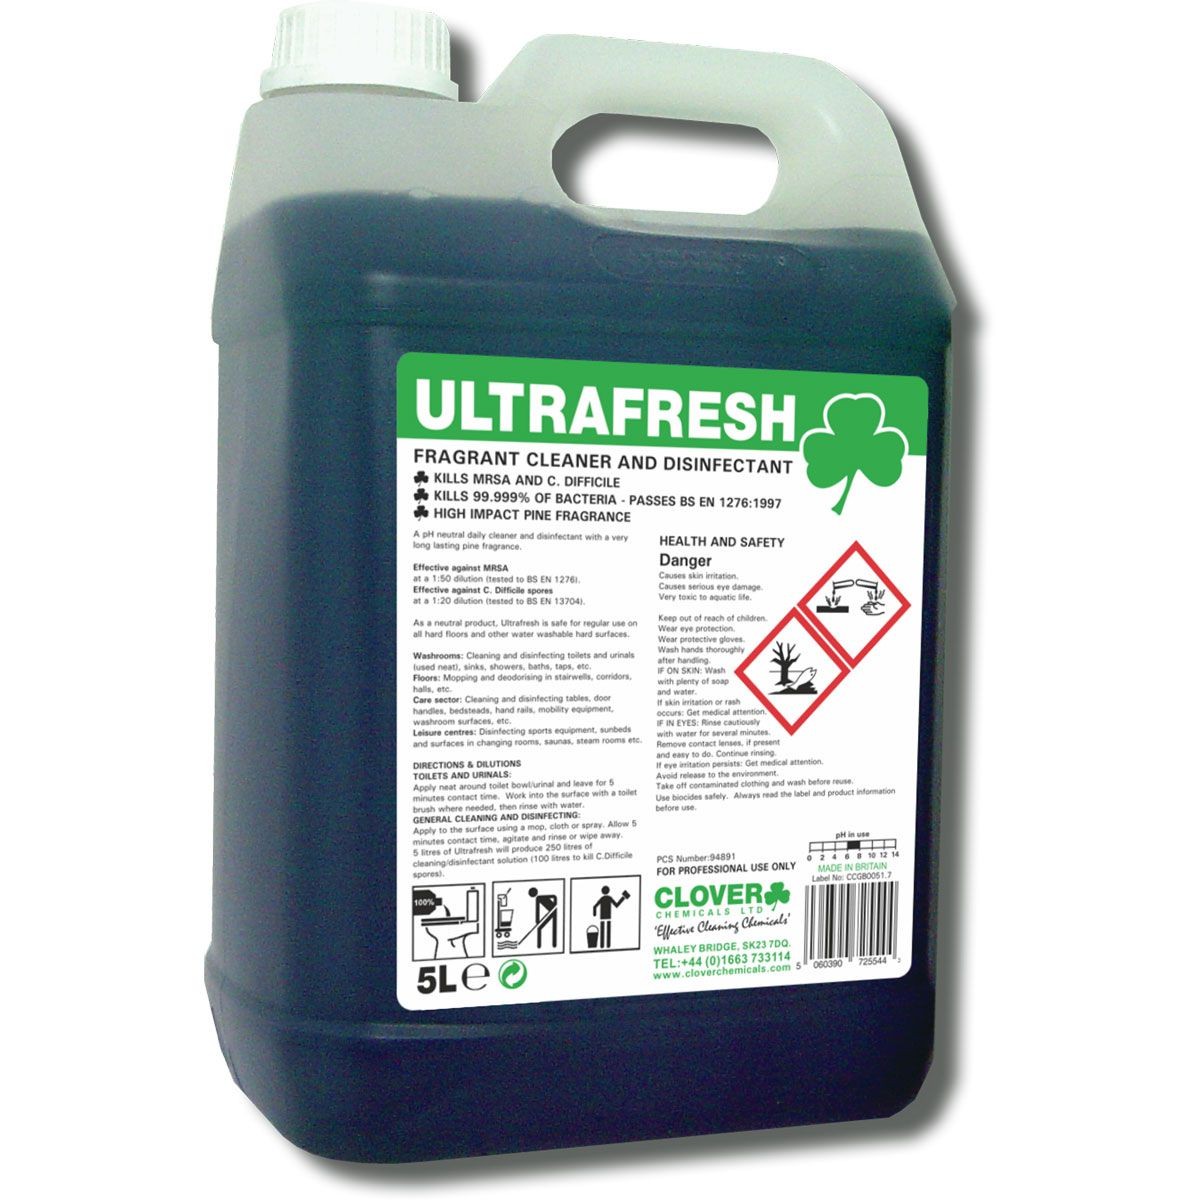 Ultrafresh+Perfumed+Cleaner+and+Disinfectant+2x5+Litre